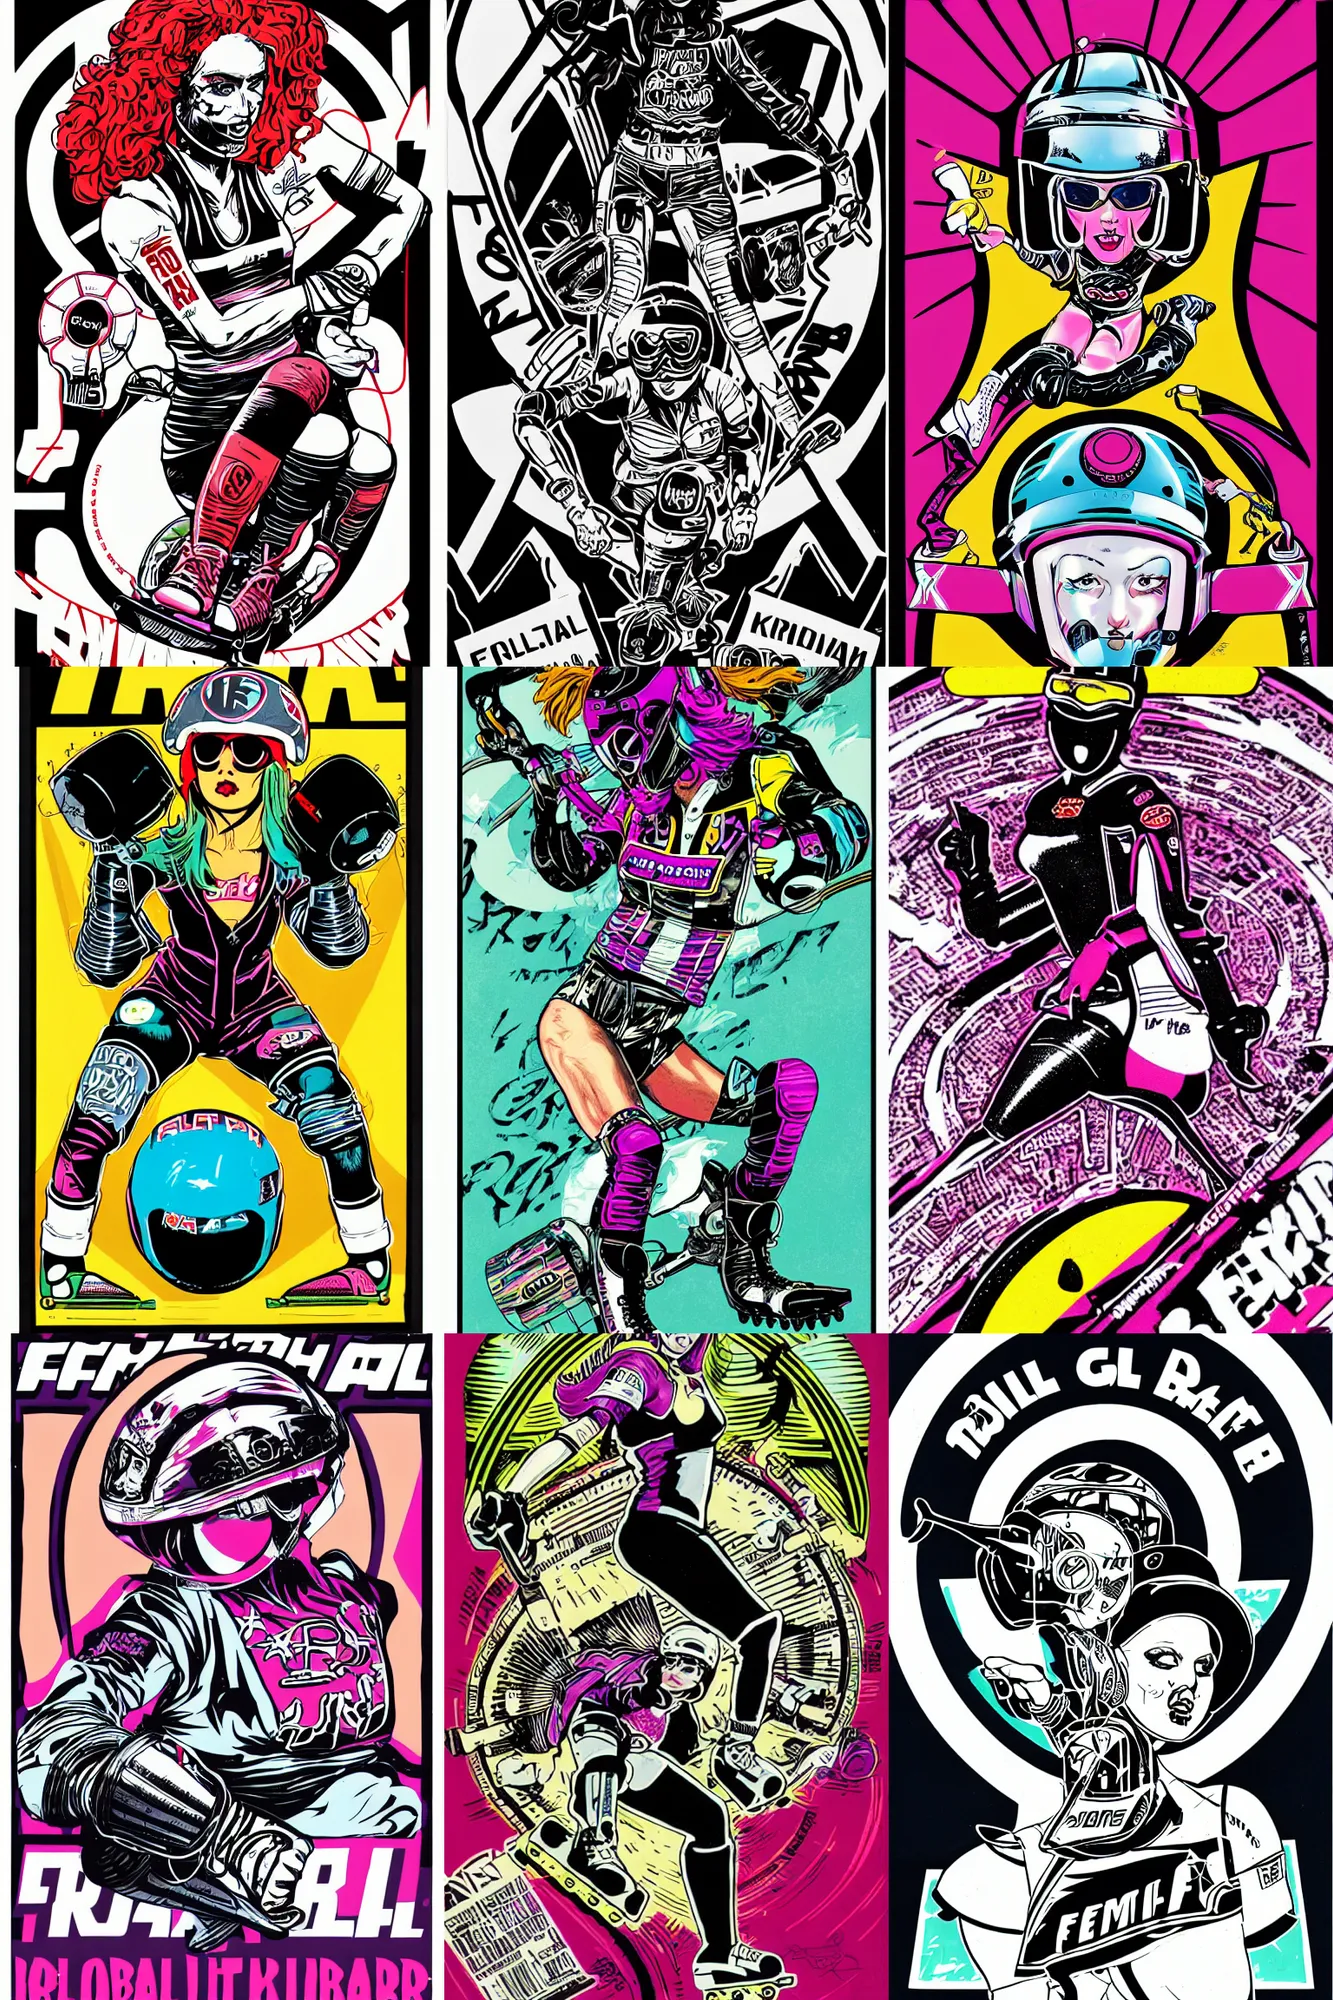 Prompt: fem-fatal roller derby girl portrait, logo, wearing skating helmet, wearing knee and elbow pads, winning, Philippe Caza, 3 colour print